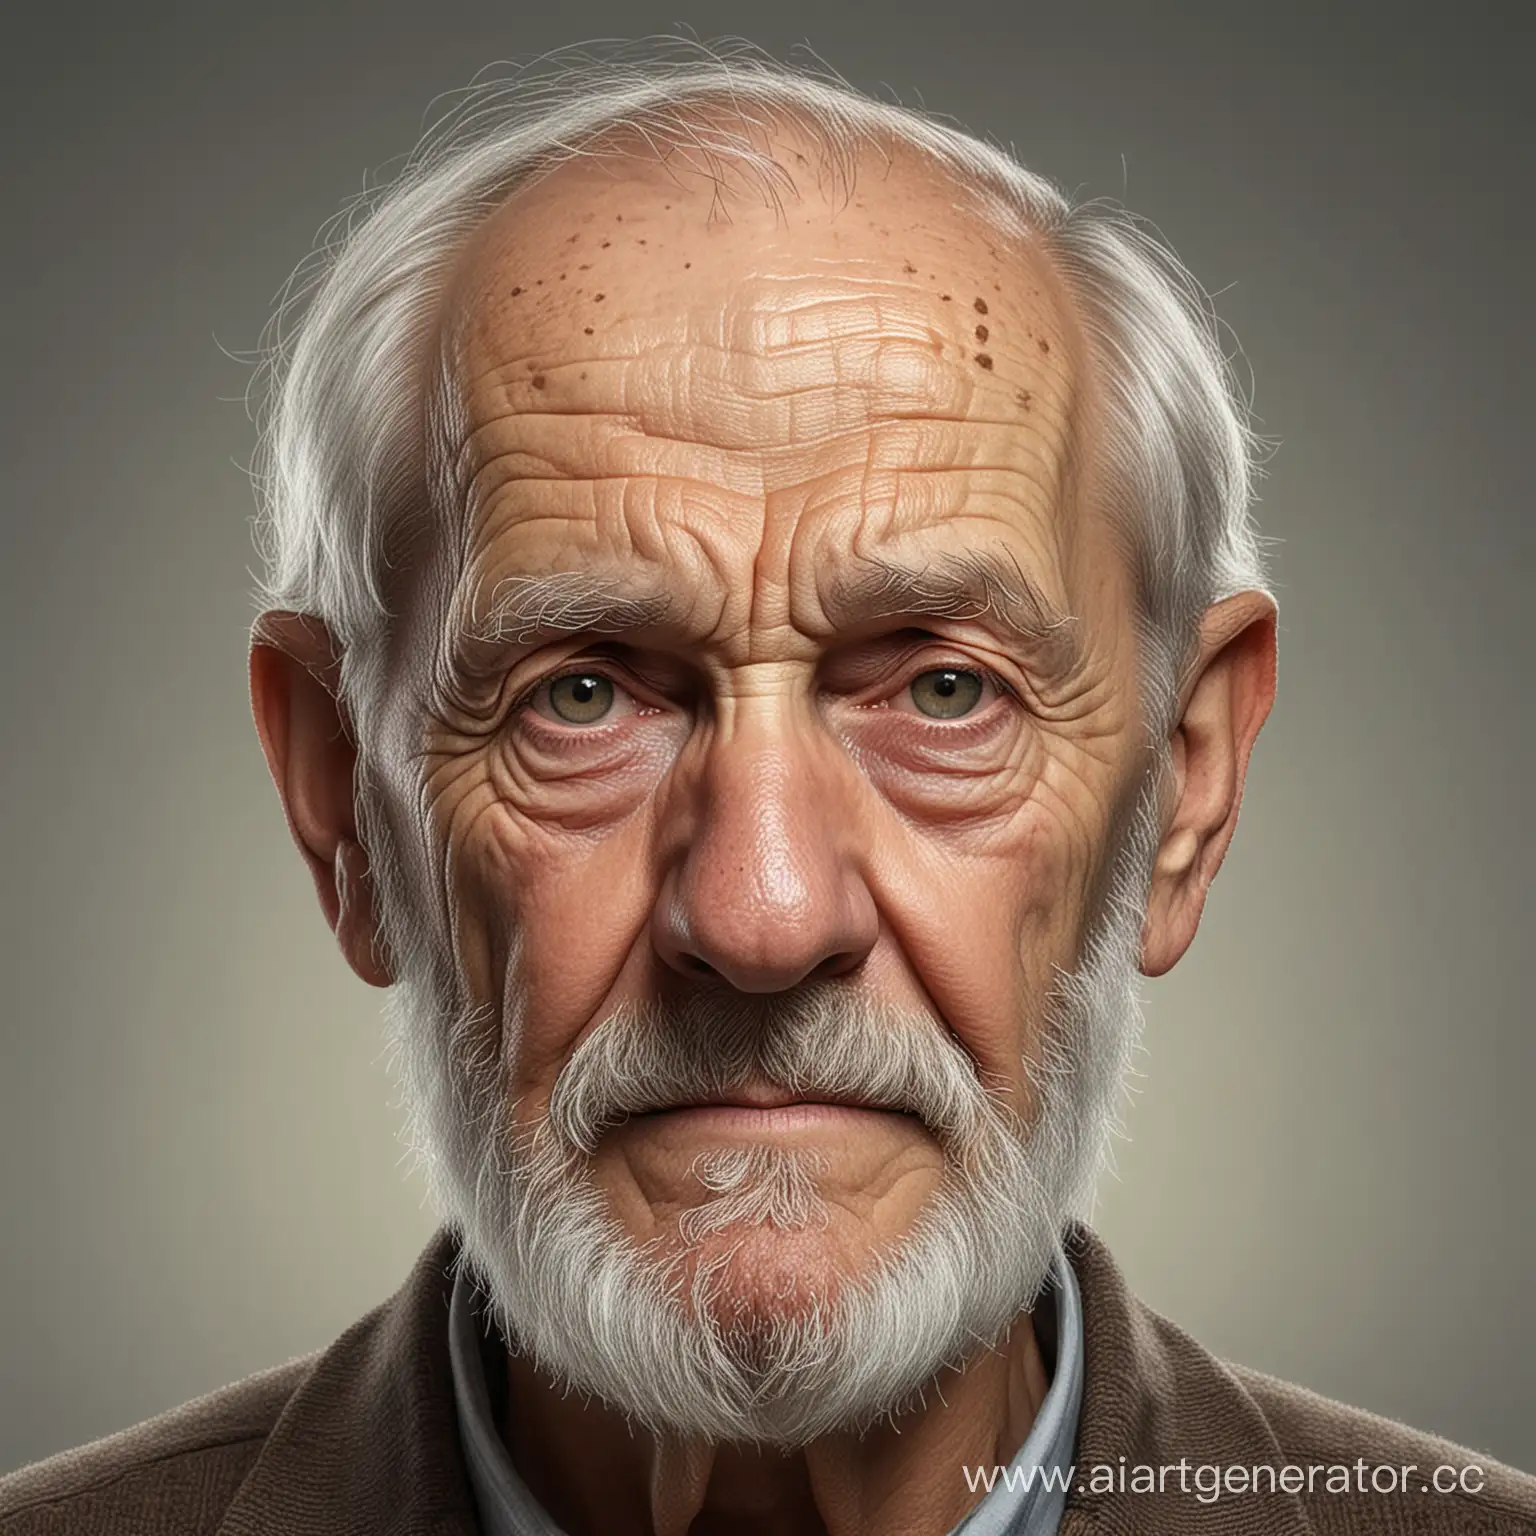 Portrait-of-a-Wise-Elderly-Man-with-a-Grizzled-Beard-and-Kind-Eyes